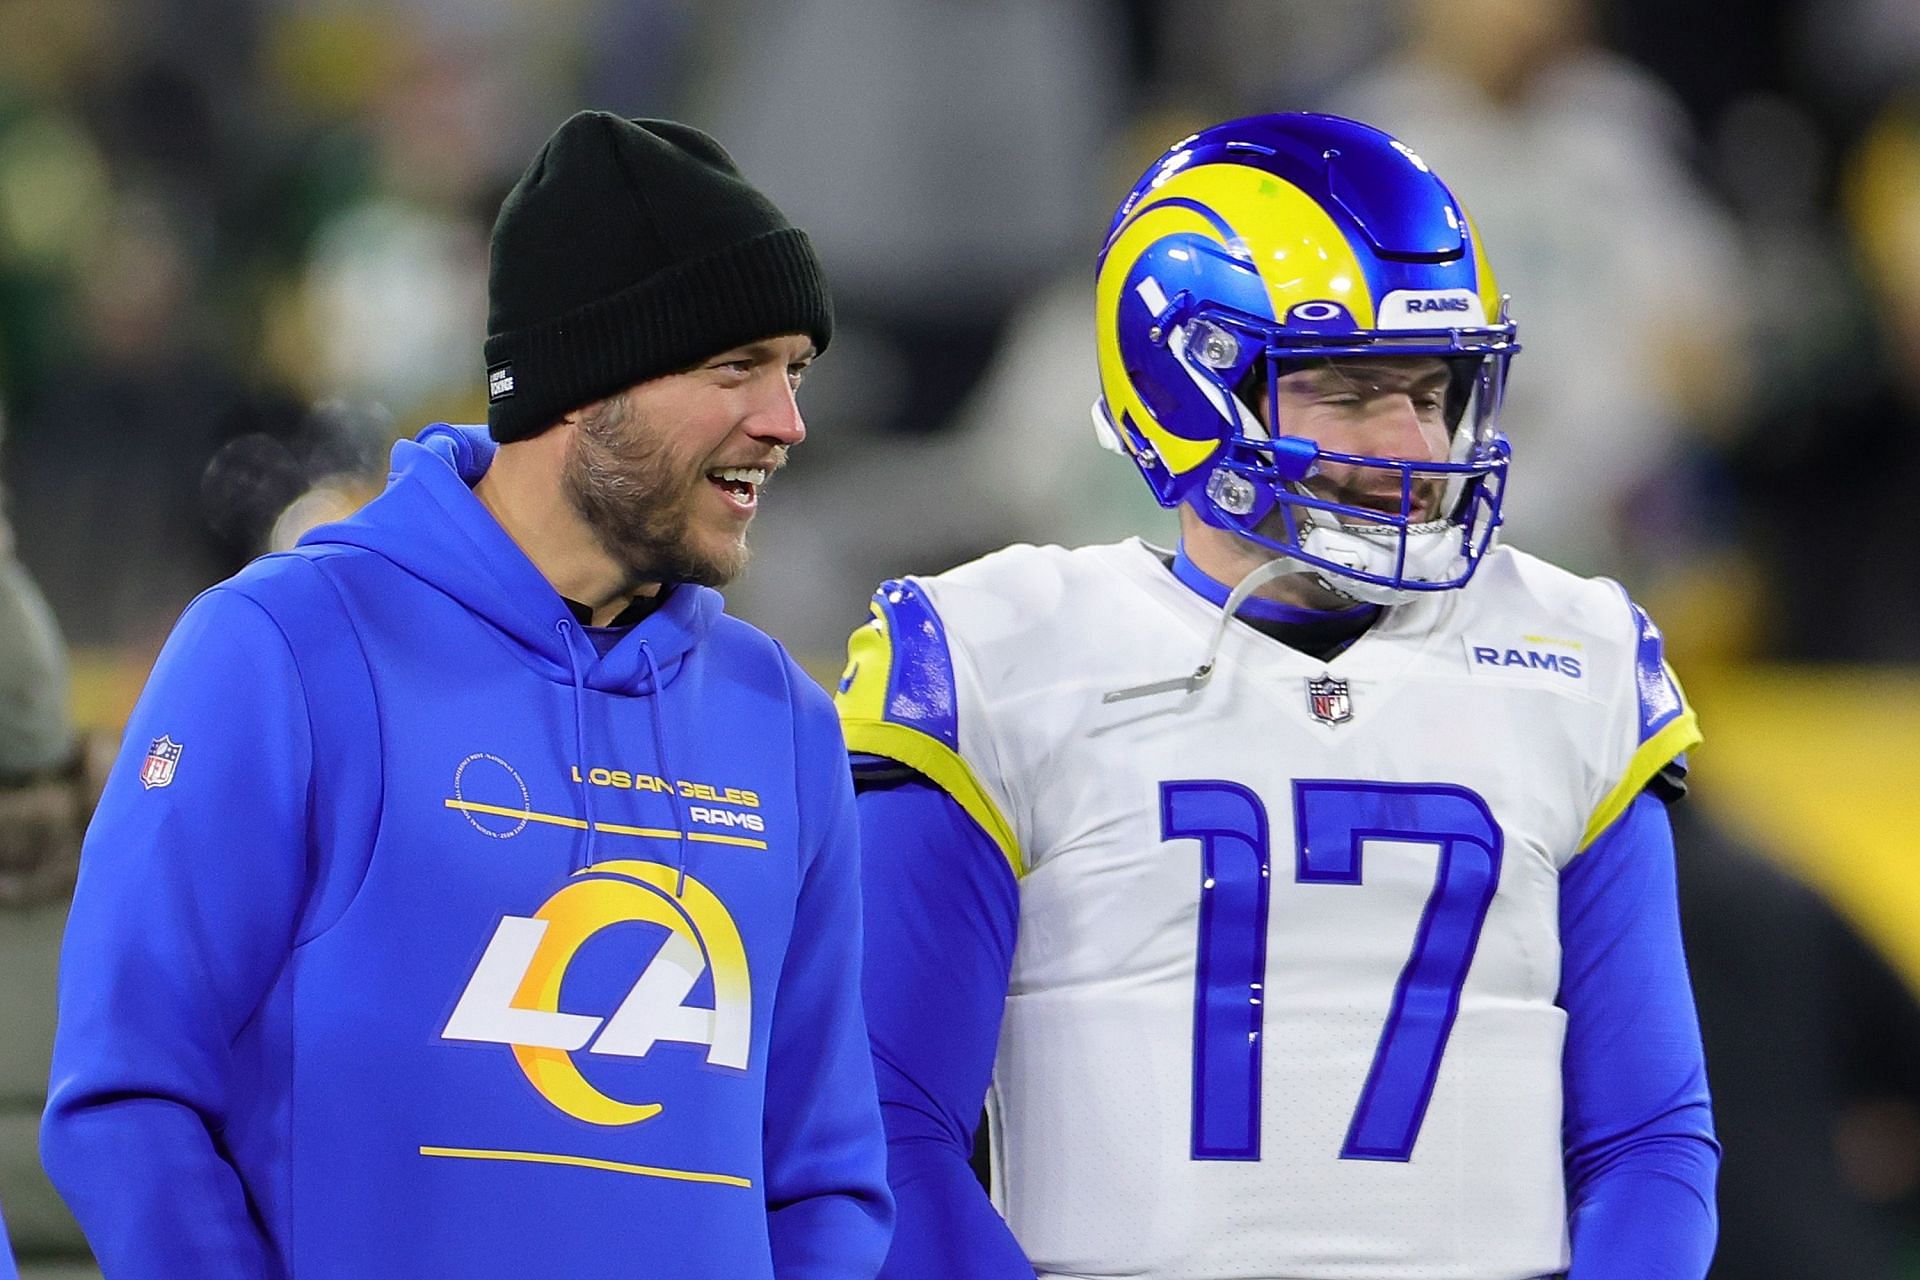 After years of exile, Matthew Stafford leads Rams to promised land